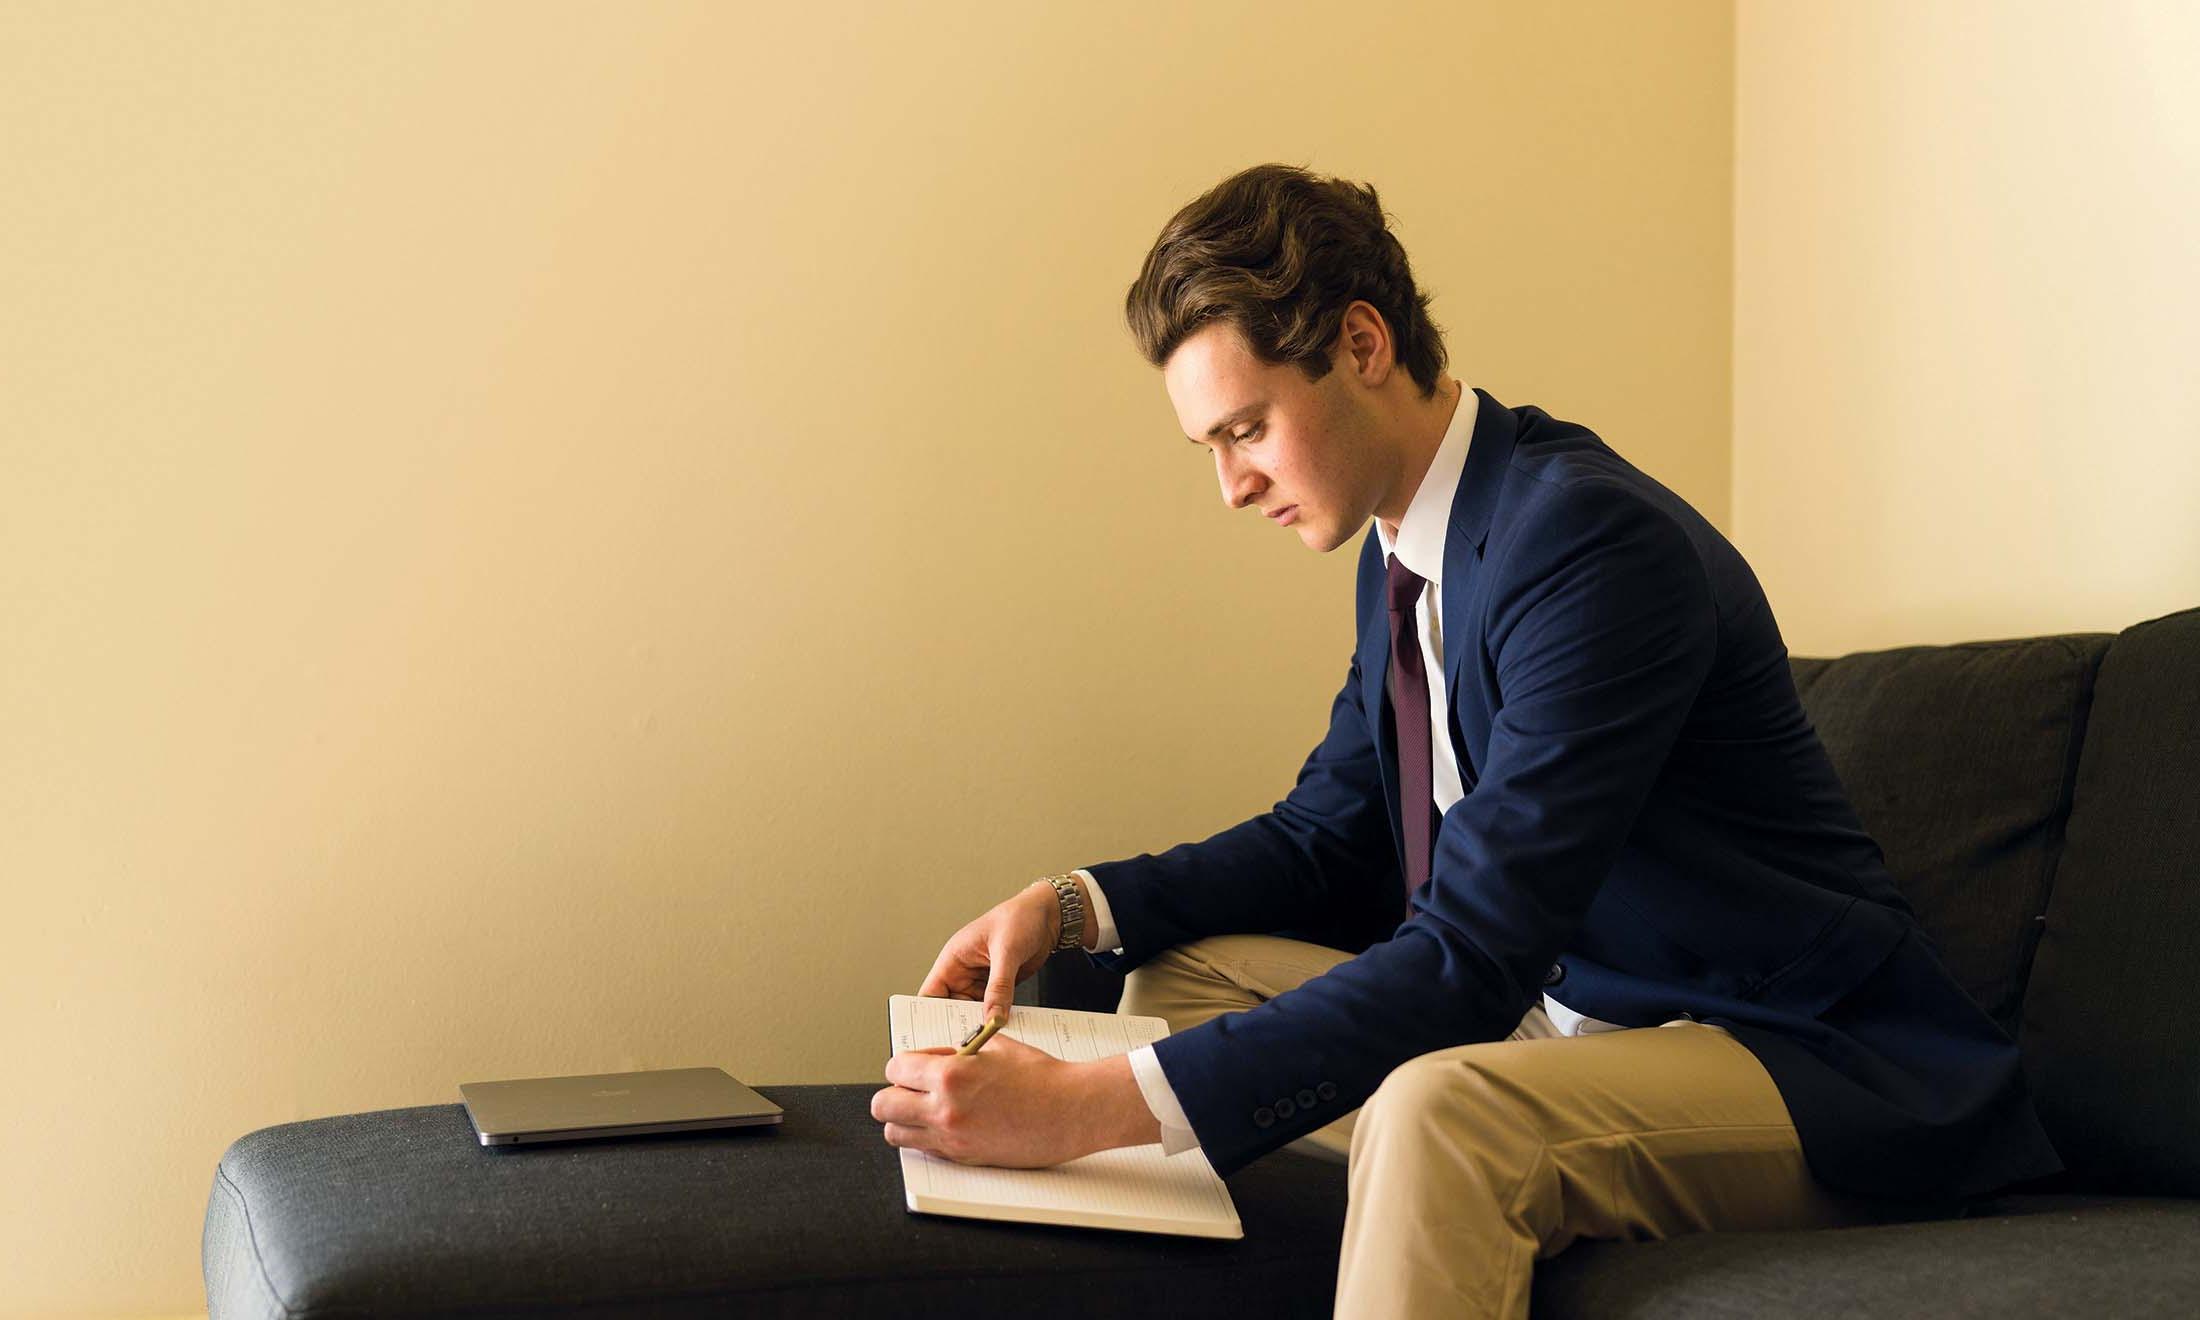 Male student sitting on chair writing in notebook